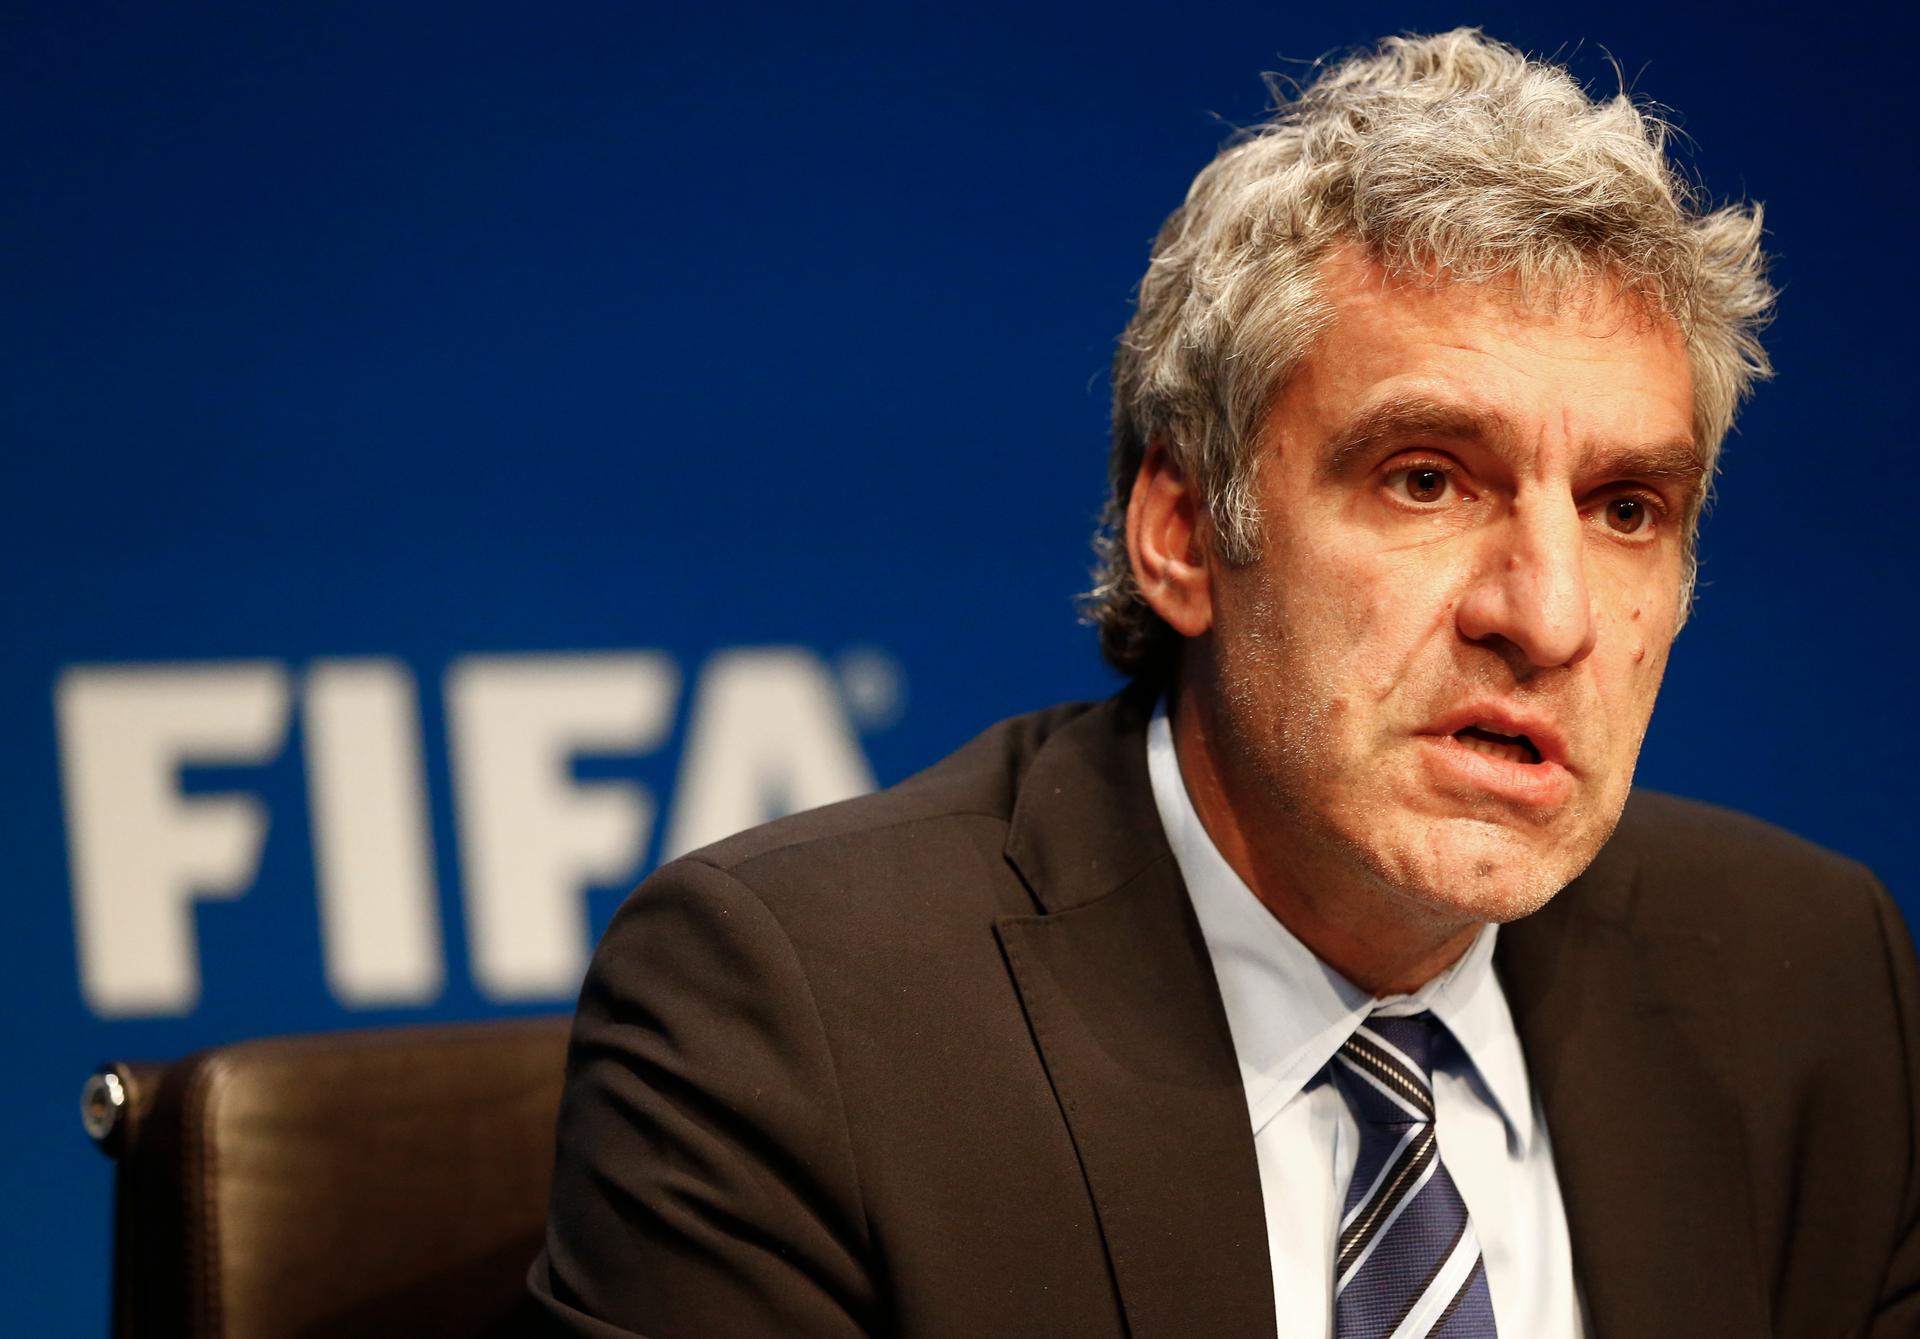 FIFA's communications director faces the spotlight after an indictment against some of the soccer organization's leaders